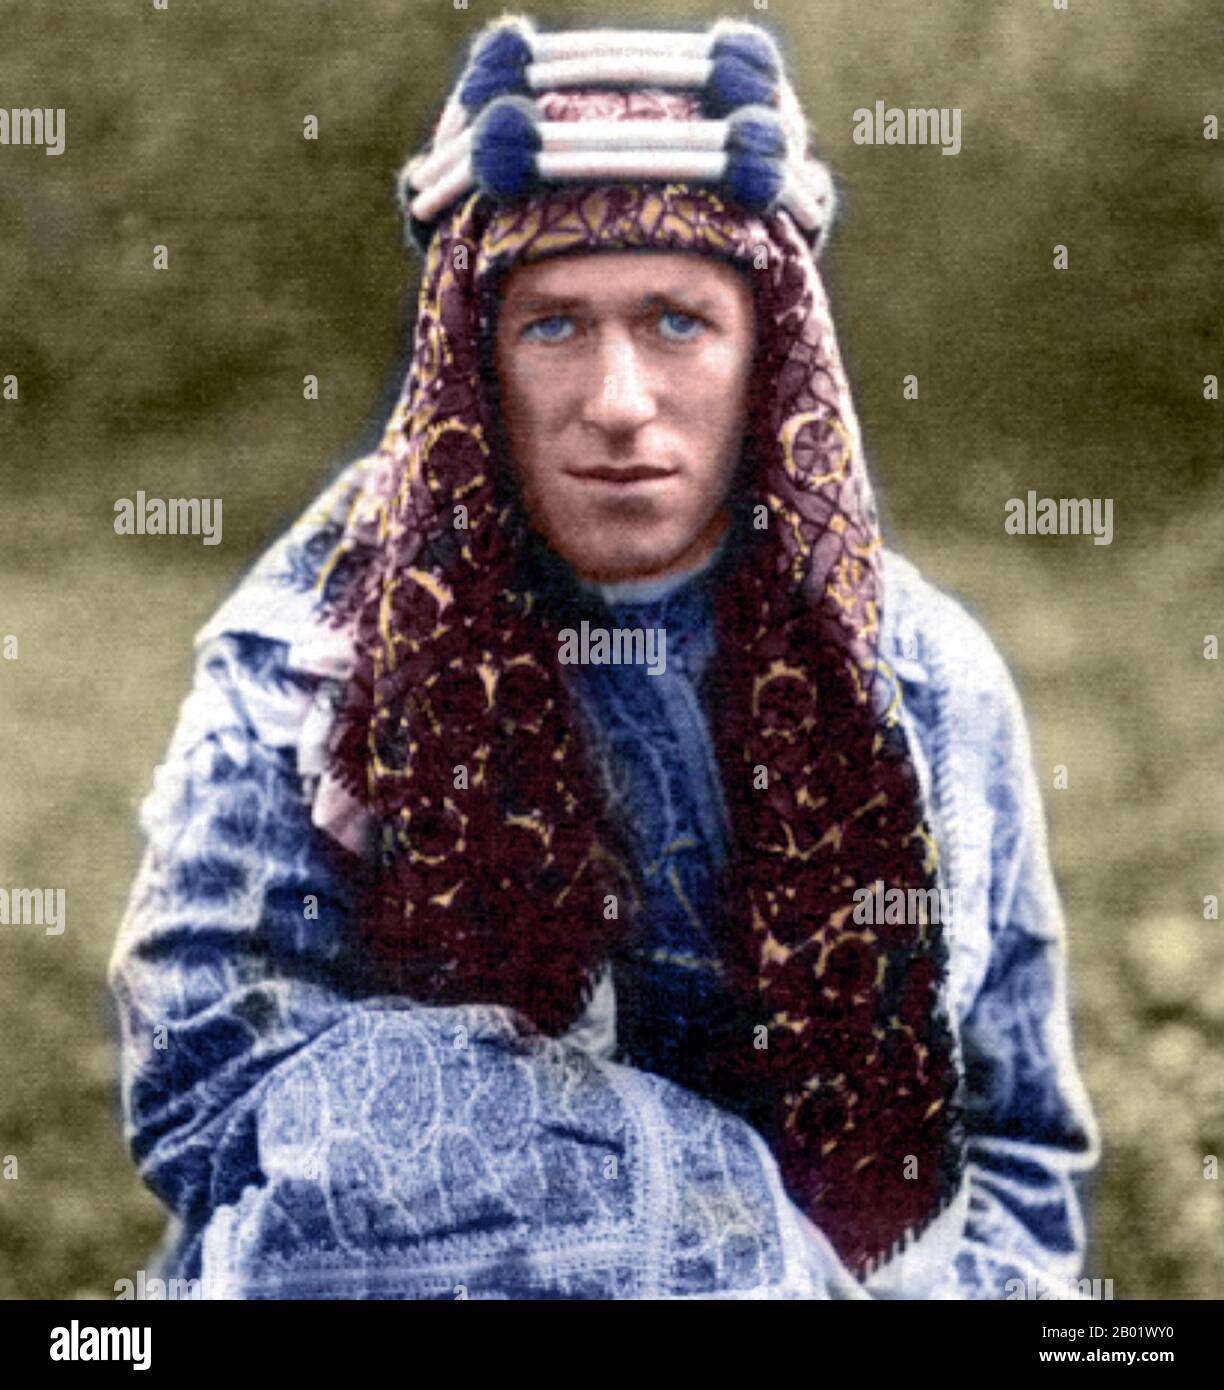 Lieutenant Colonel Thomas Edward Lawrence, CB, DSO (16 August 1888 – 19 May 1935), known professionally as T. E. Lawrence, was a British Army officer renowned especially for his liaison role during the Arab Revolt against Ottoman Turkish rule of 1916–18. The extraordinary breadth and variety of his activities and associations, and his ability to describe them vividly in writing, earned him international fame as 'Lawrence of Arabia'. Stock Photo